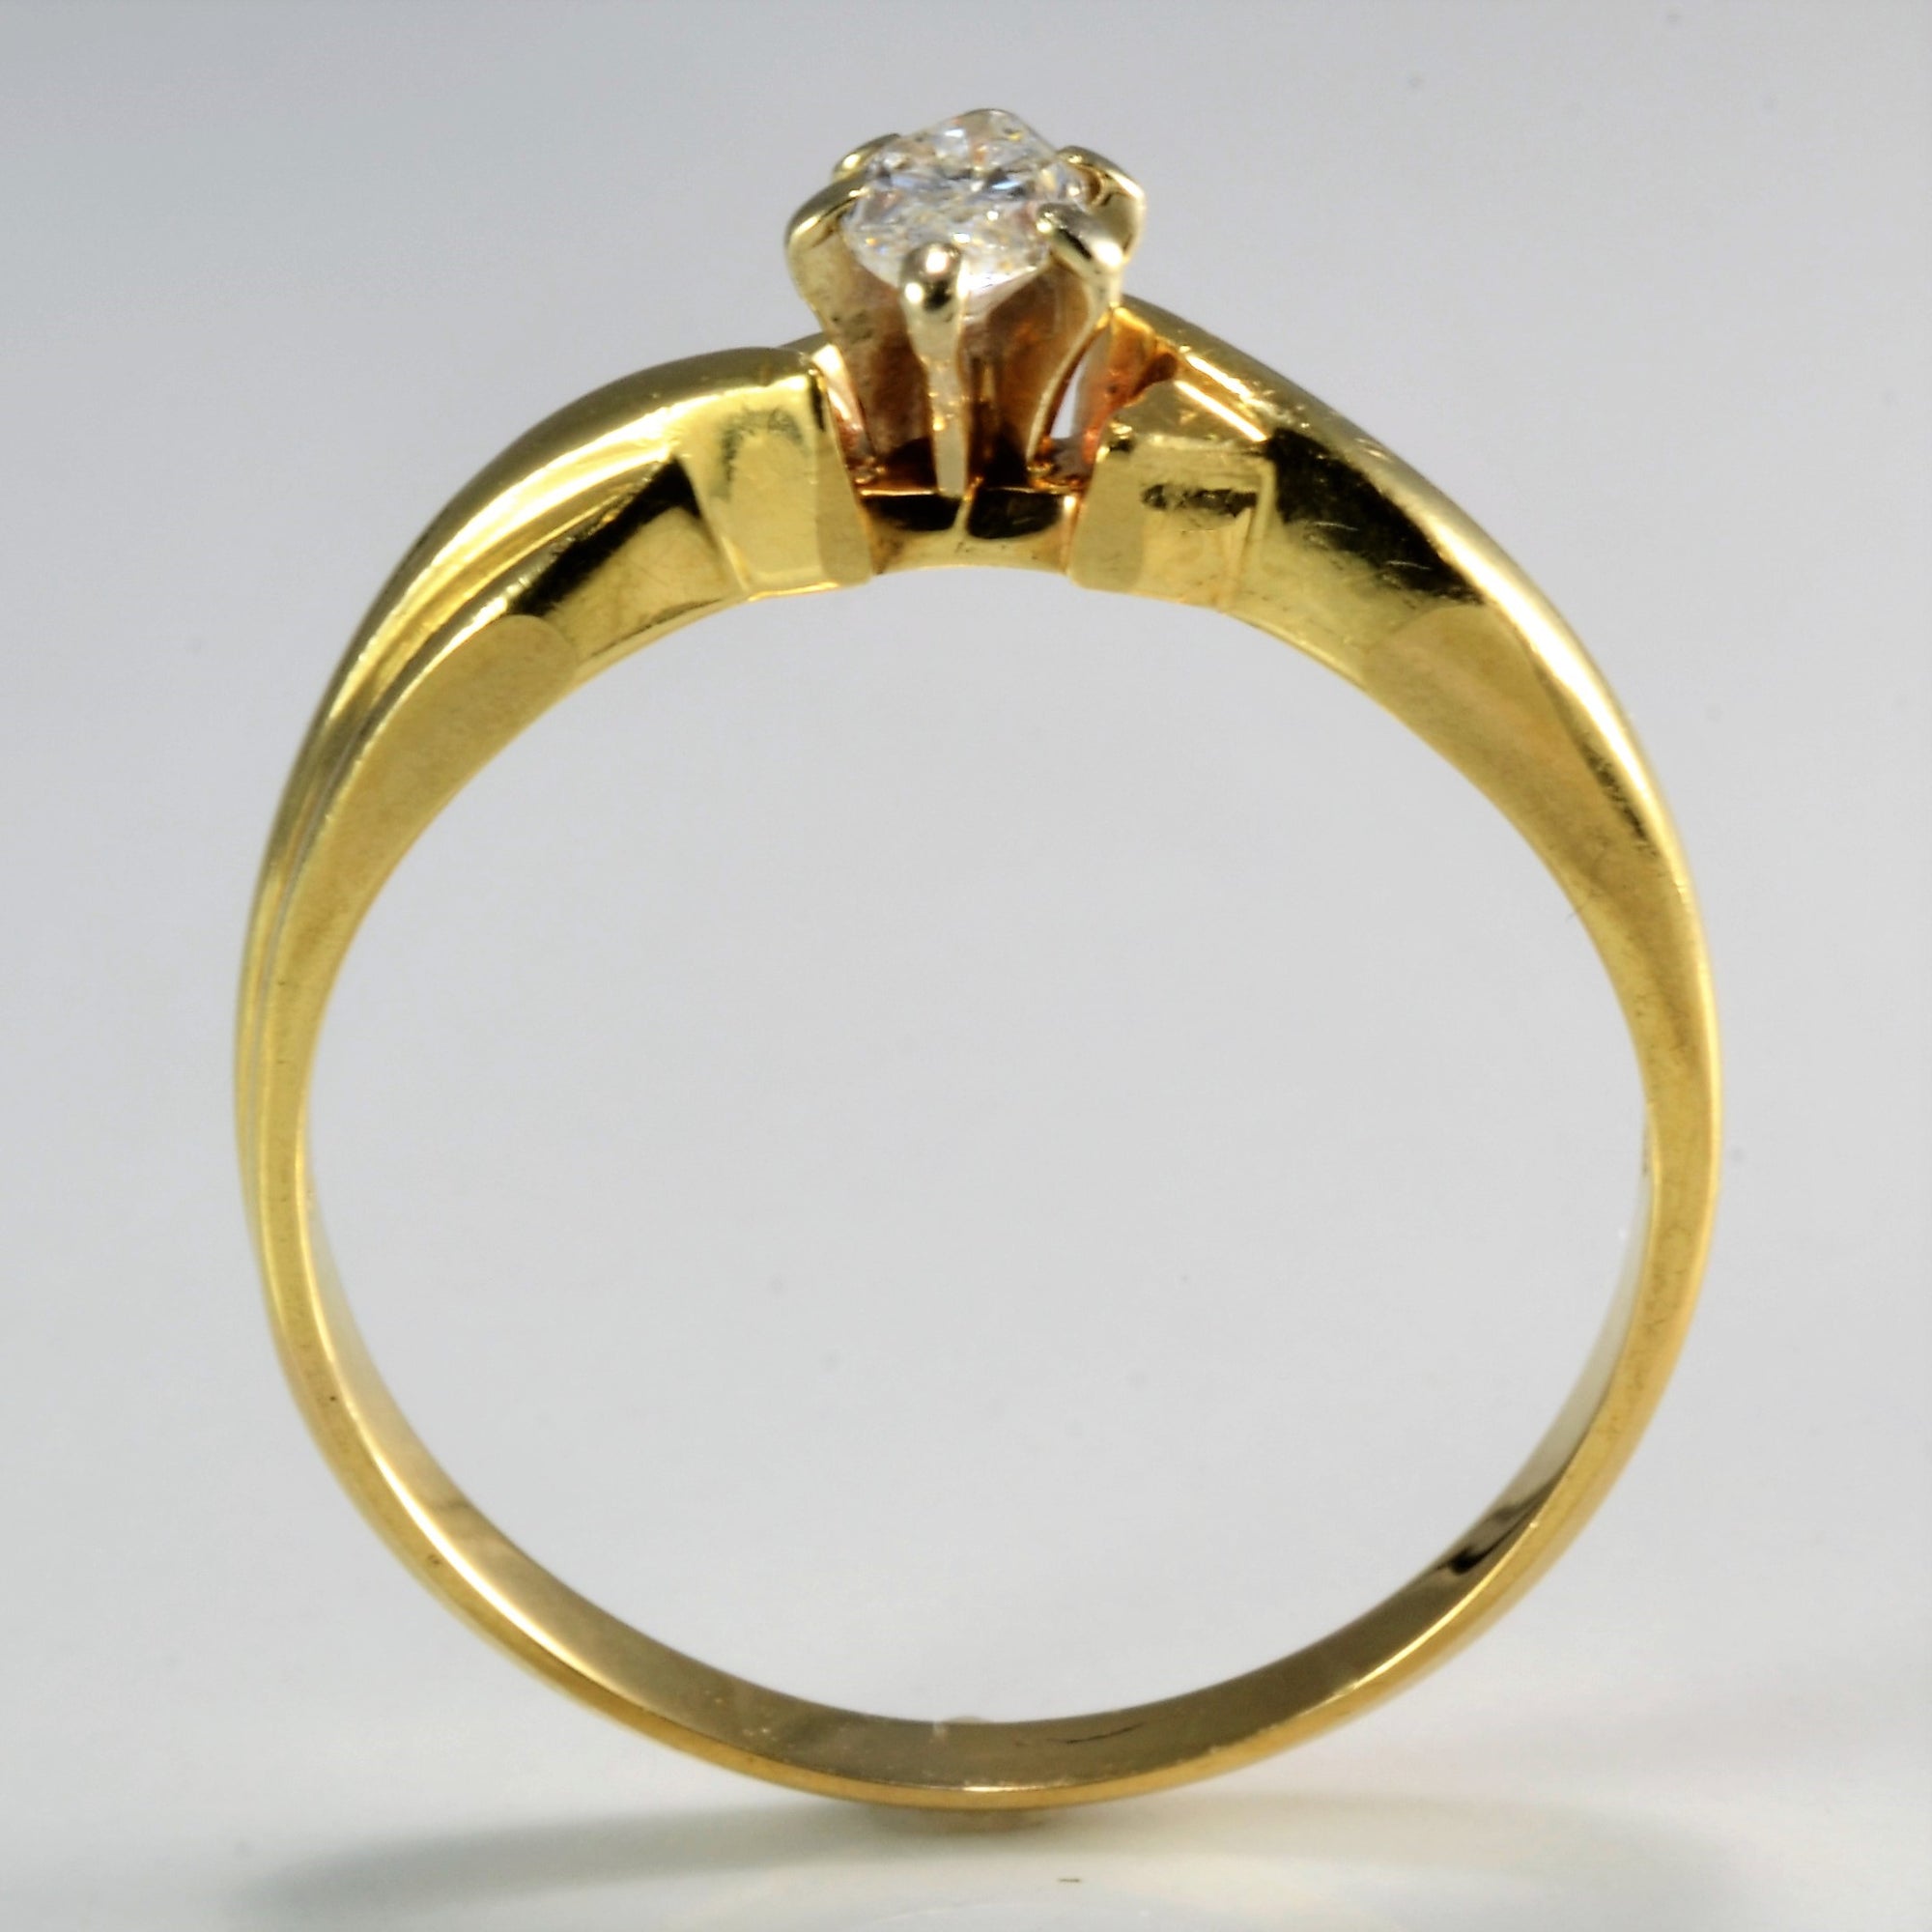 Offset Solitaire Marquise Diamond Ring | 0.20 ct, SZ 8.5 |